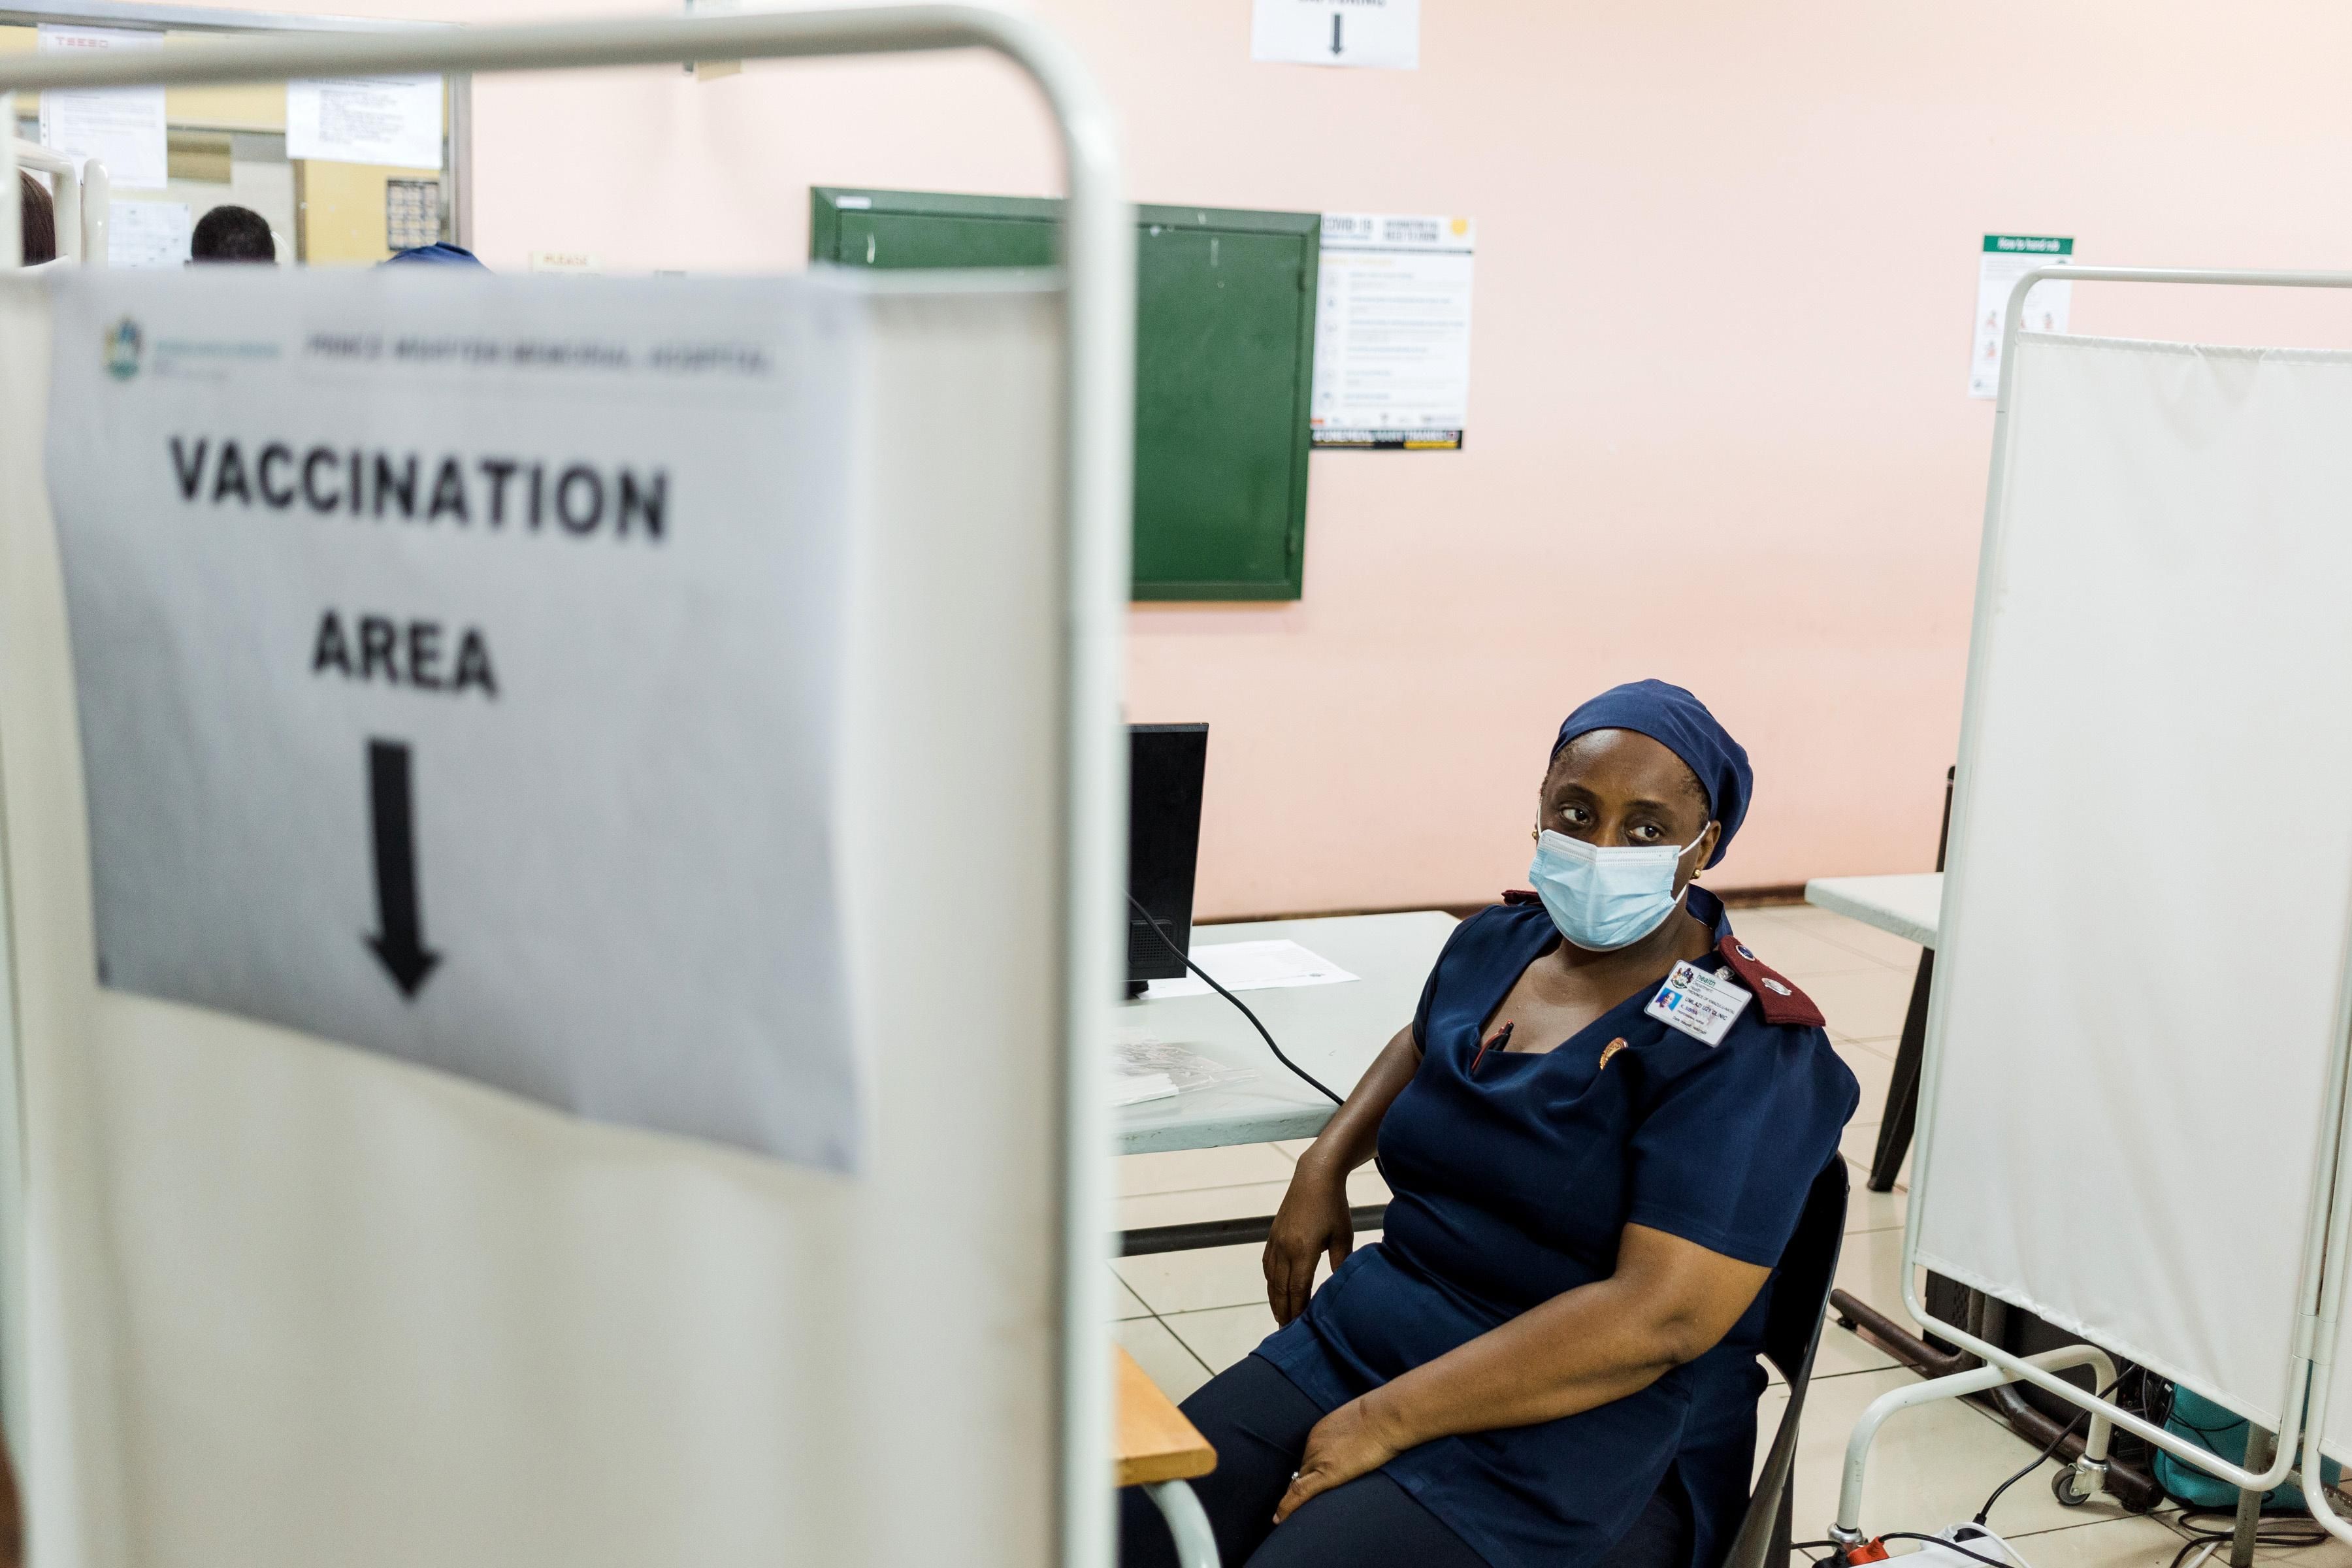 A nurse waits to receive a coronavirus vaccine dose in South Africa